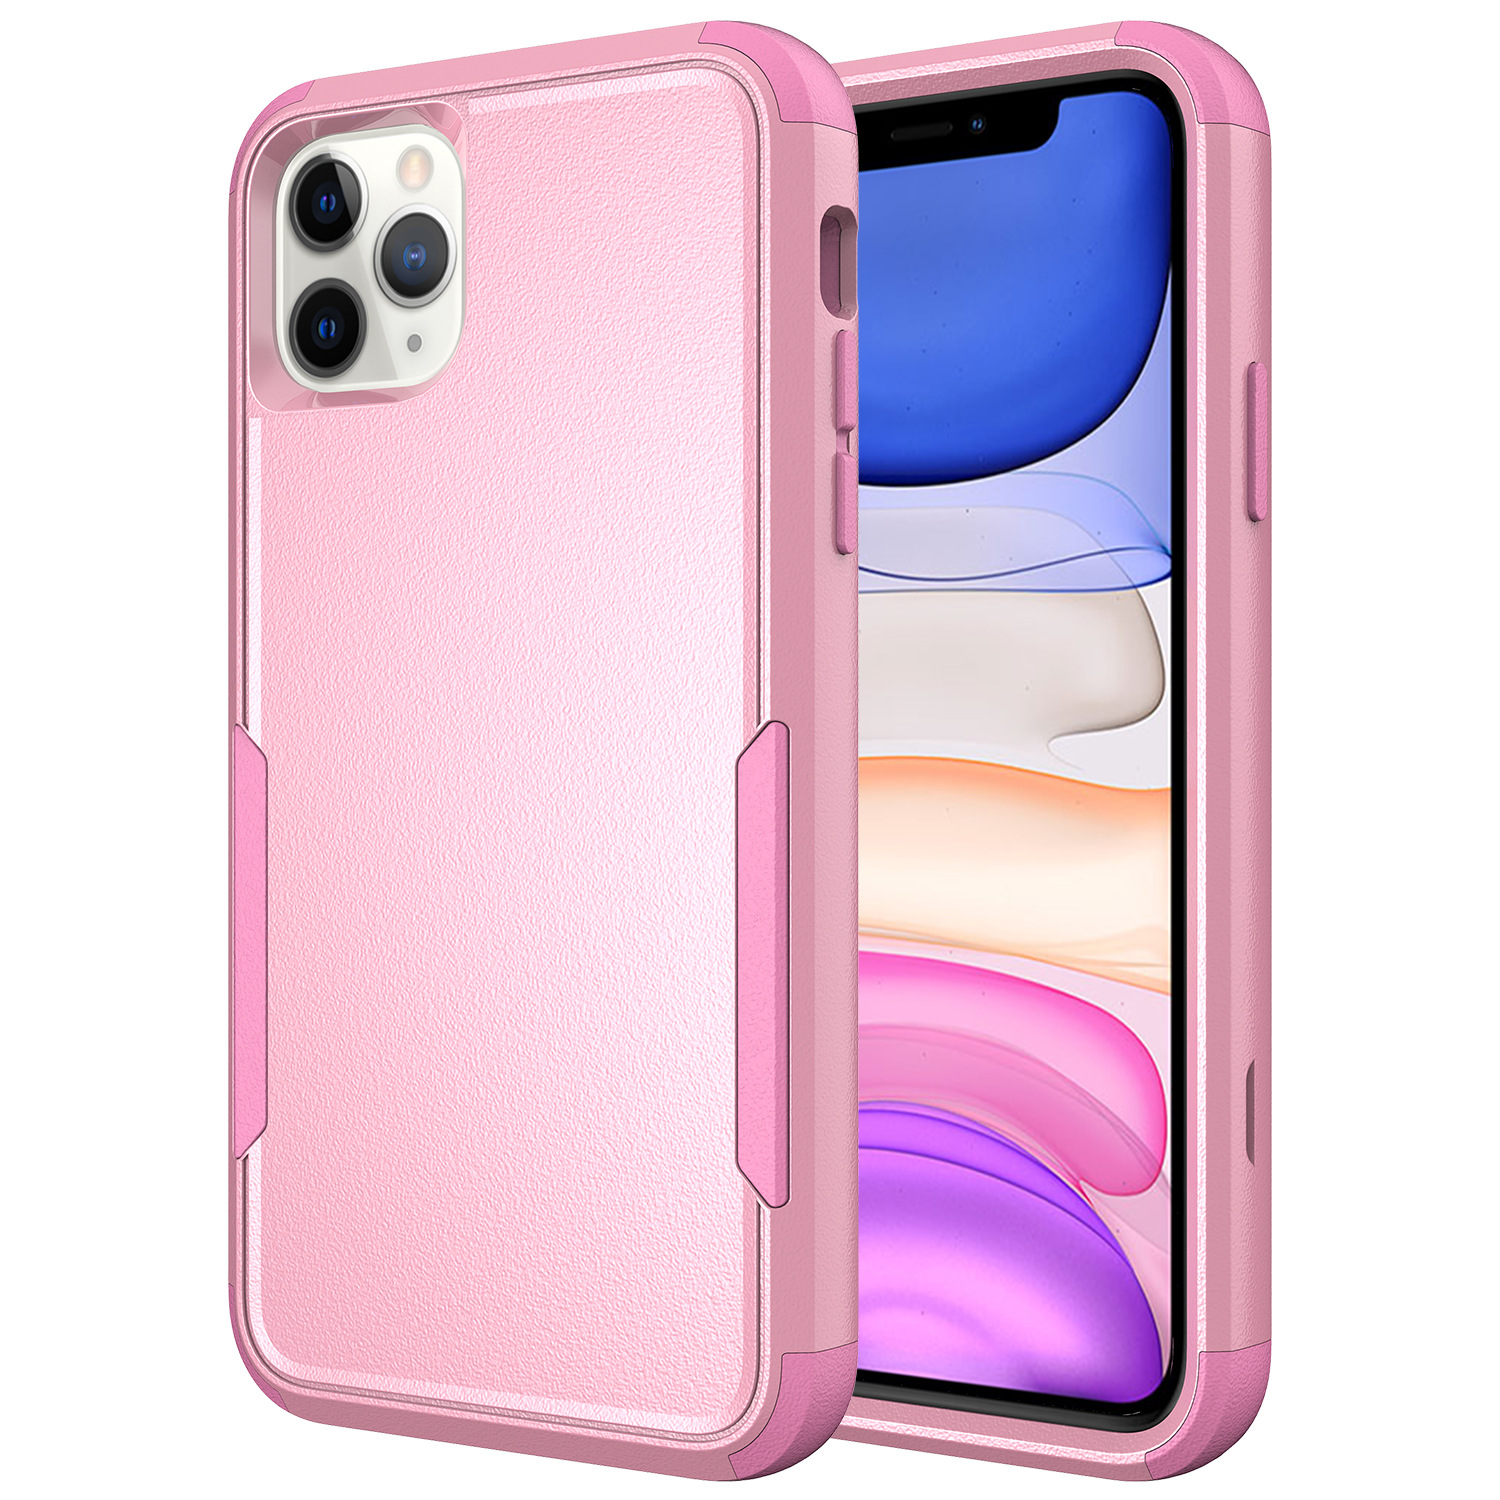 Heavy Duty Strong Armor Hybrid Case Cover for Apple iPHONE 12 / 12 Pro 6.1 (Pink)